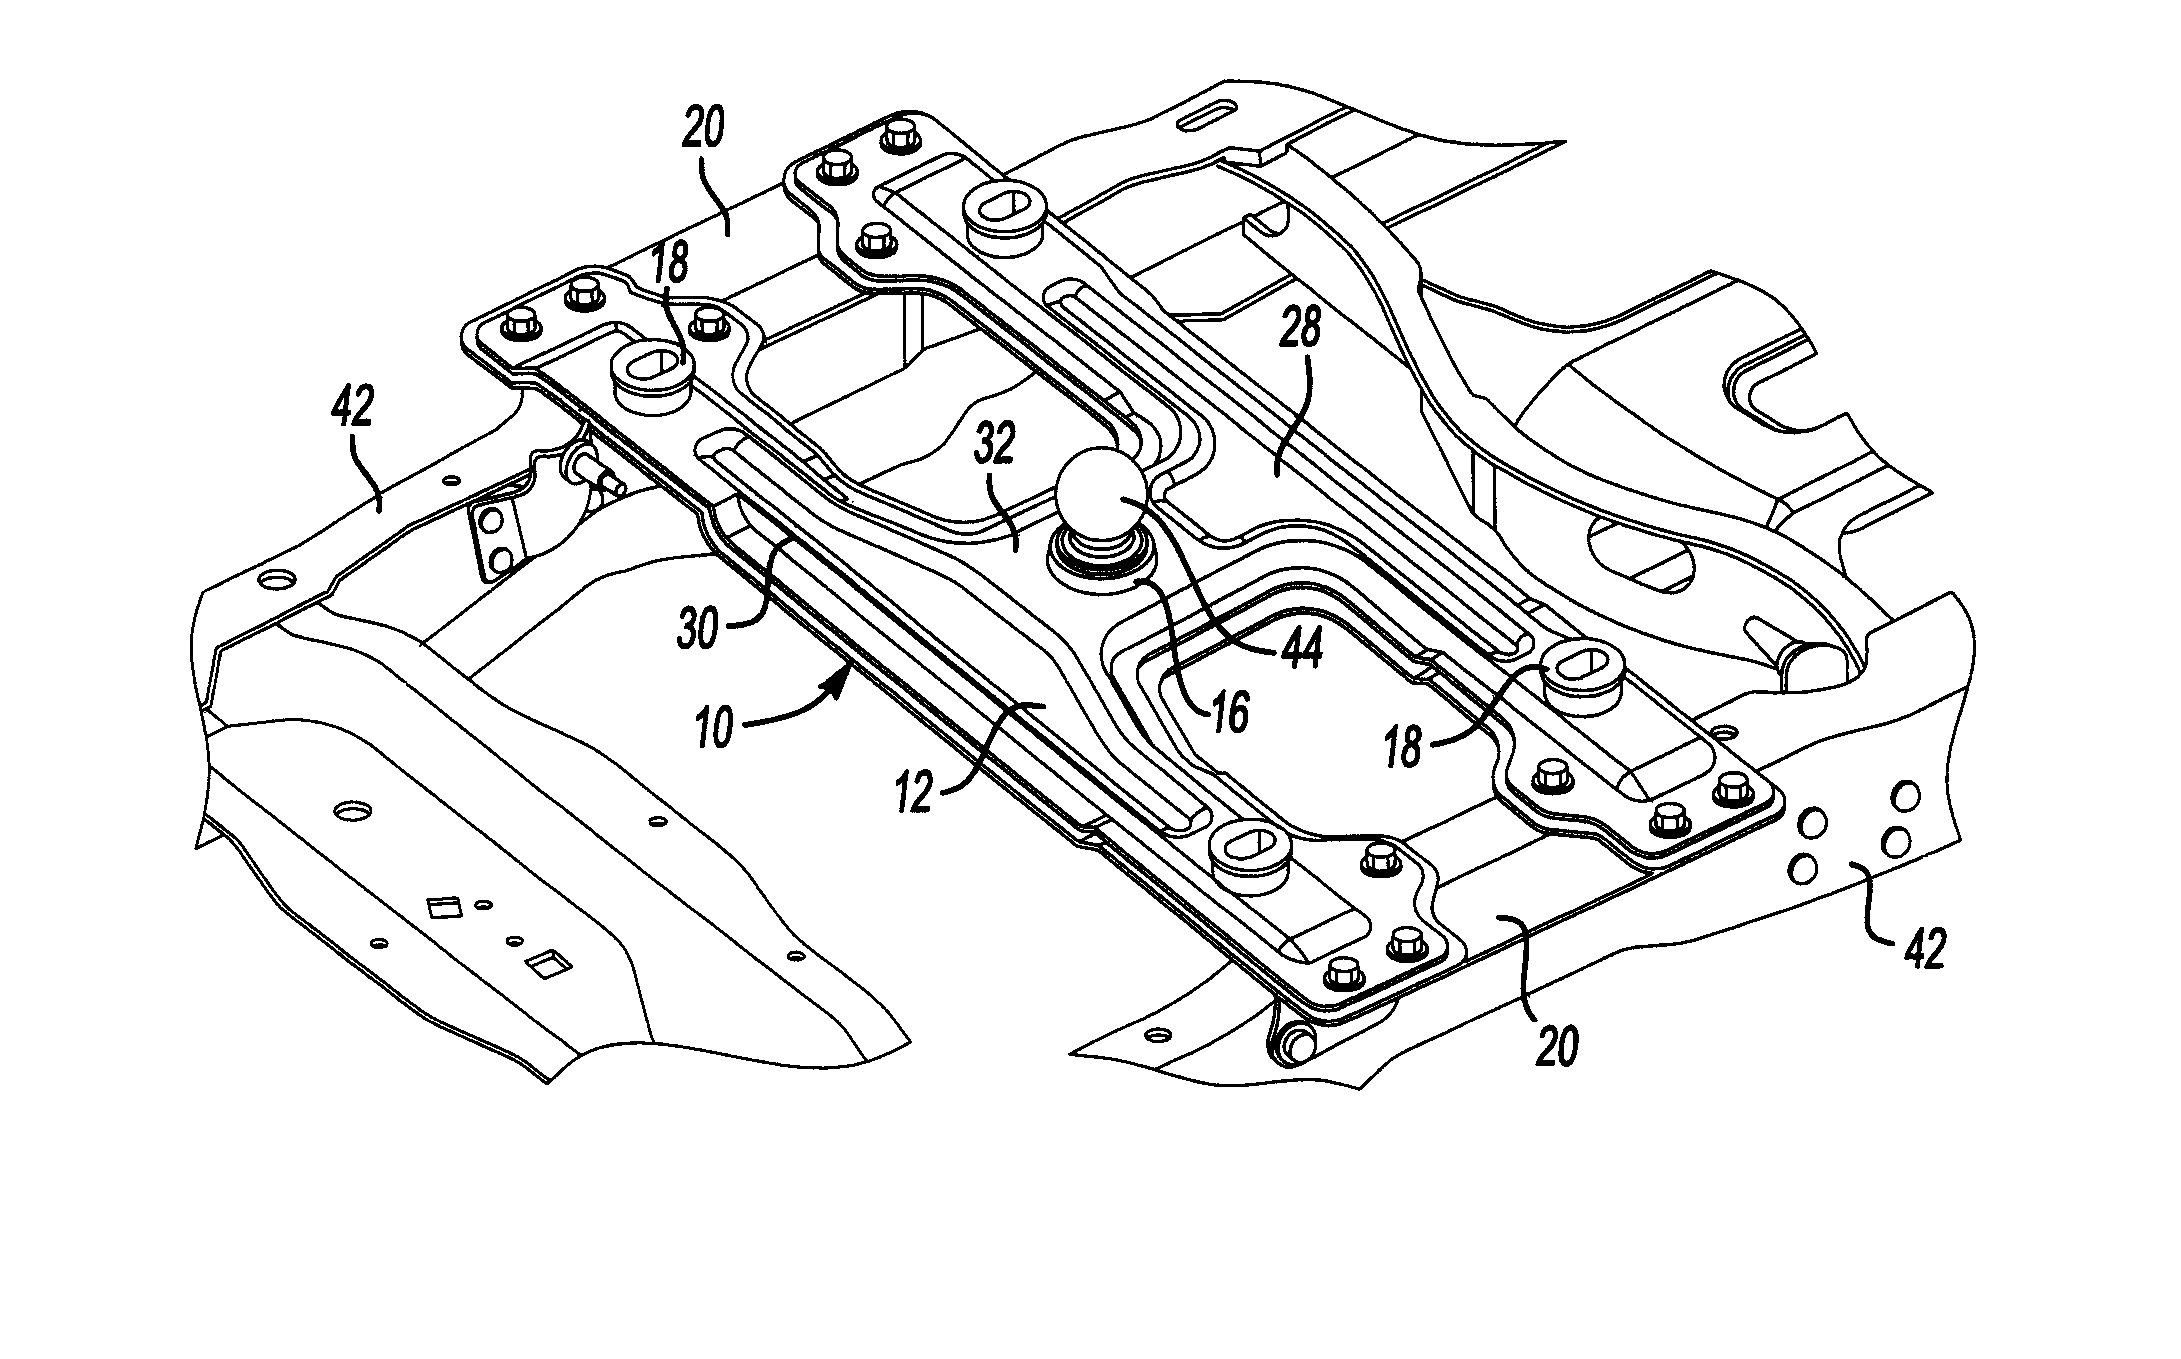 Integrated support structure for either a fifth wheel hitch or a gooseneck trailer hitch